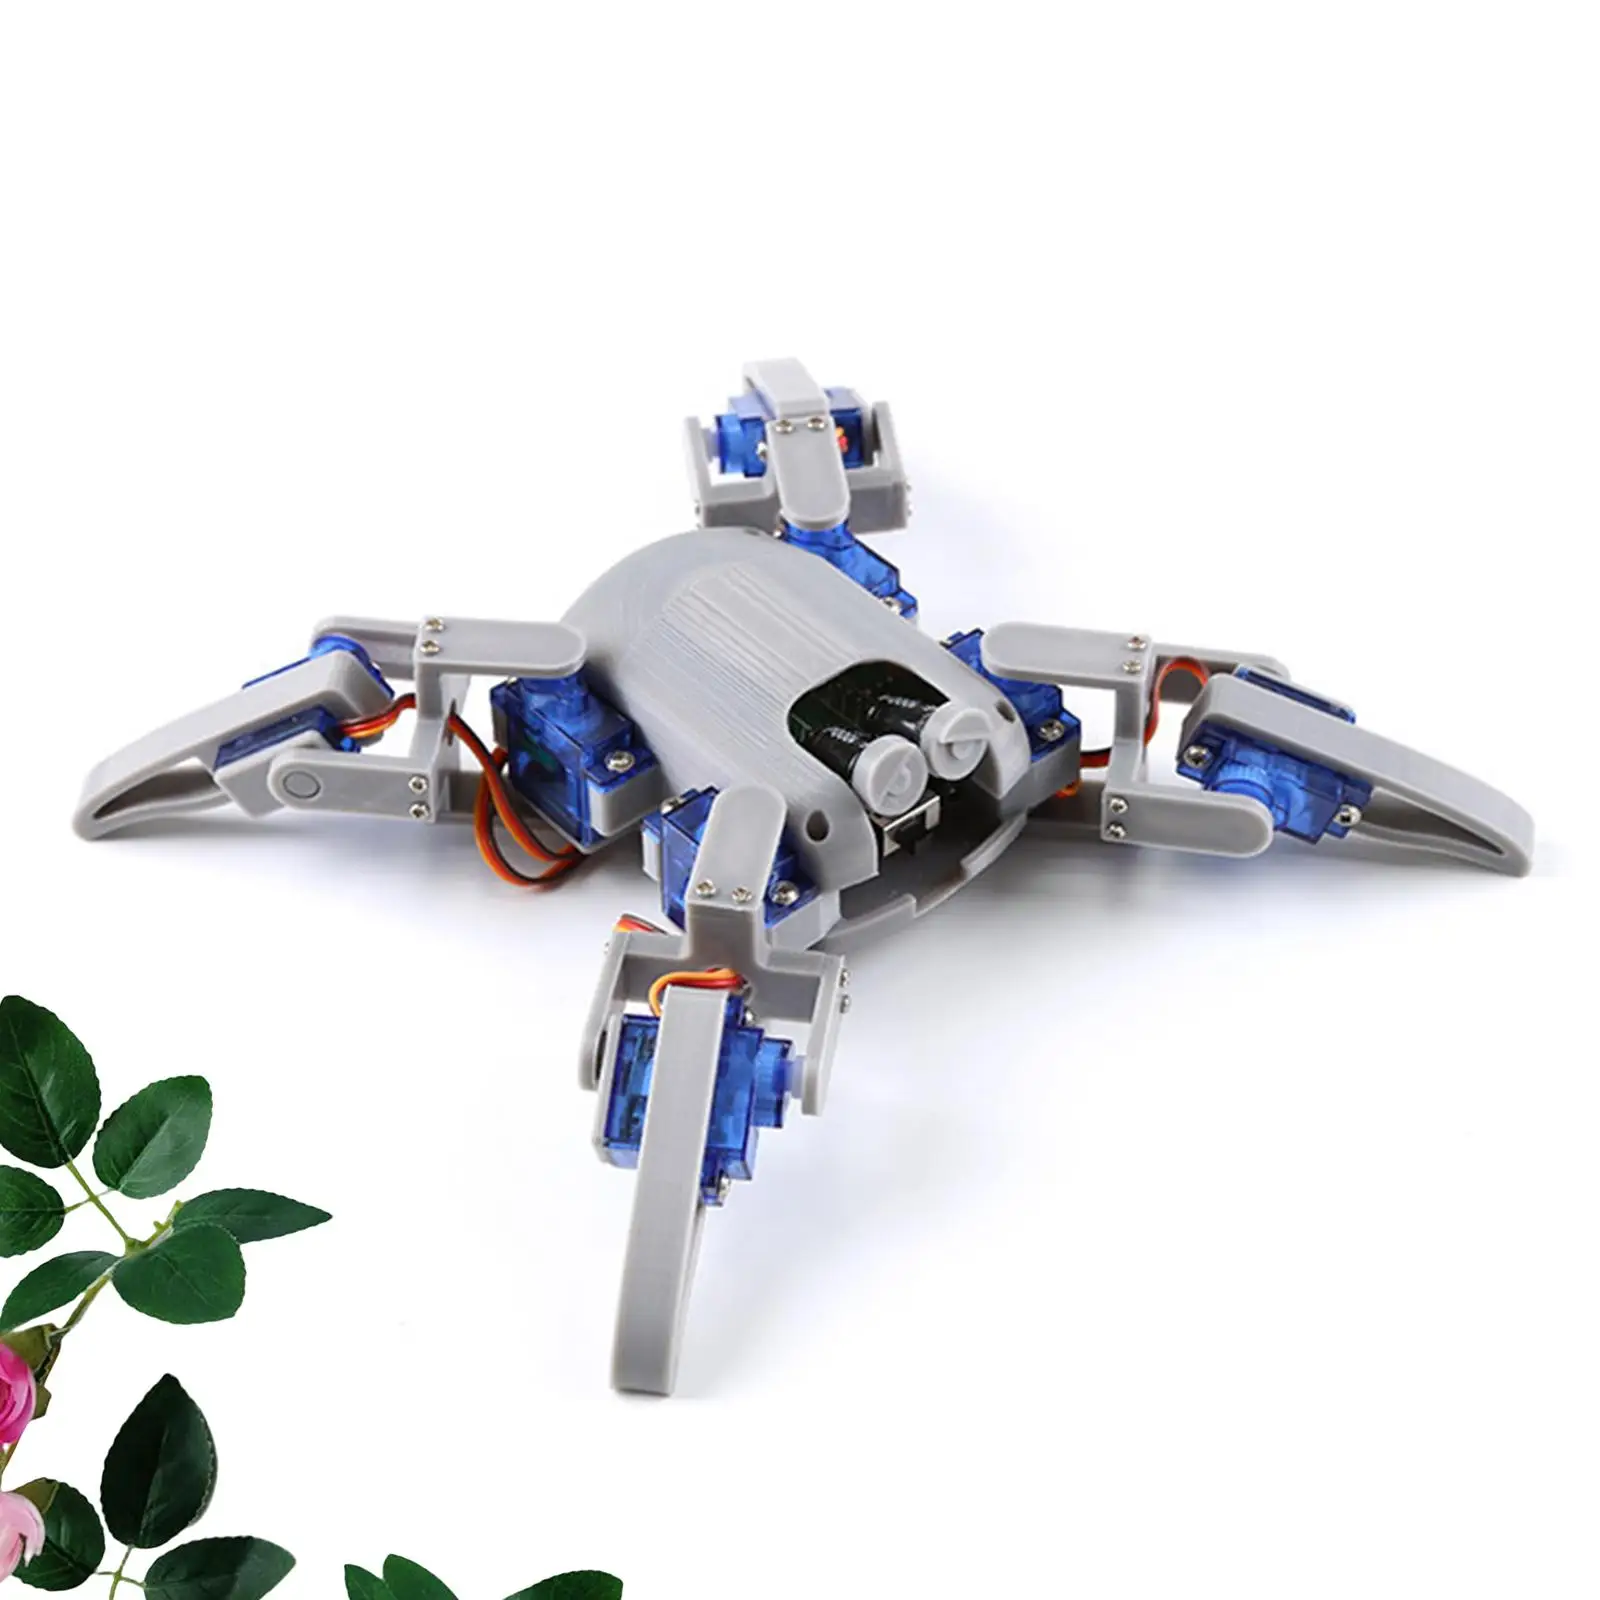 Quadruped Spider Robot Kits Open Source for Technology Science